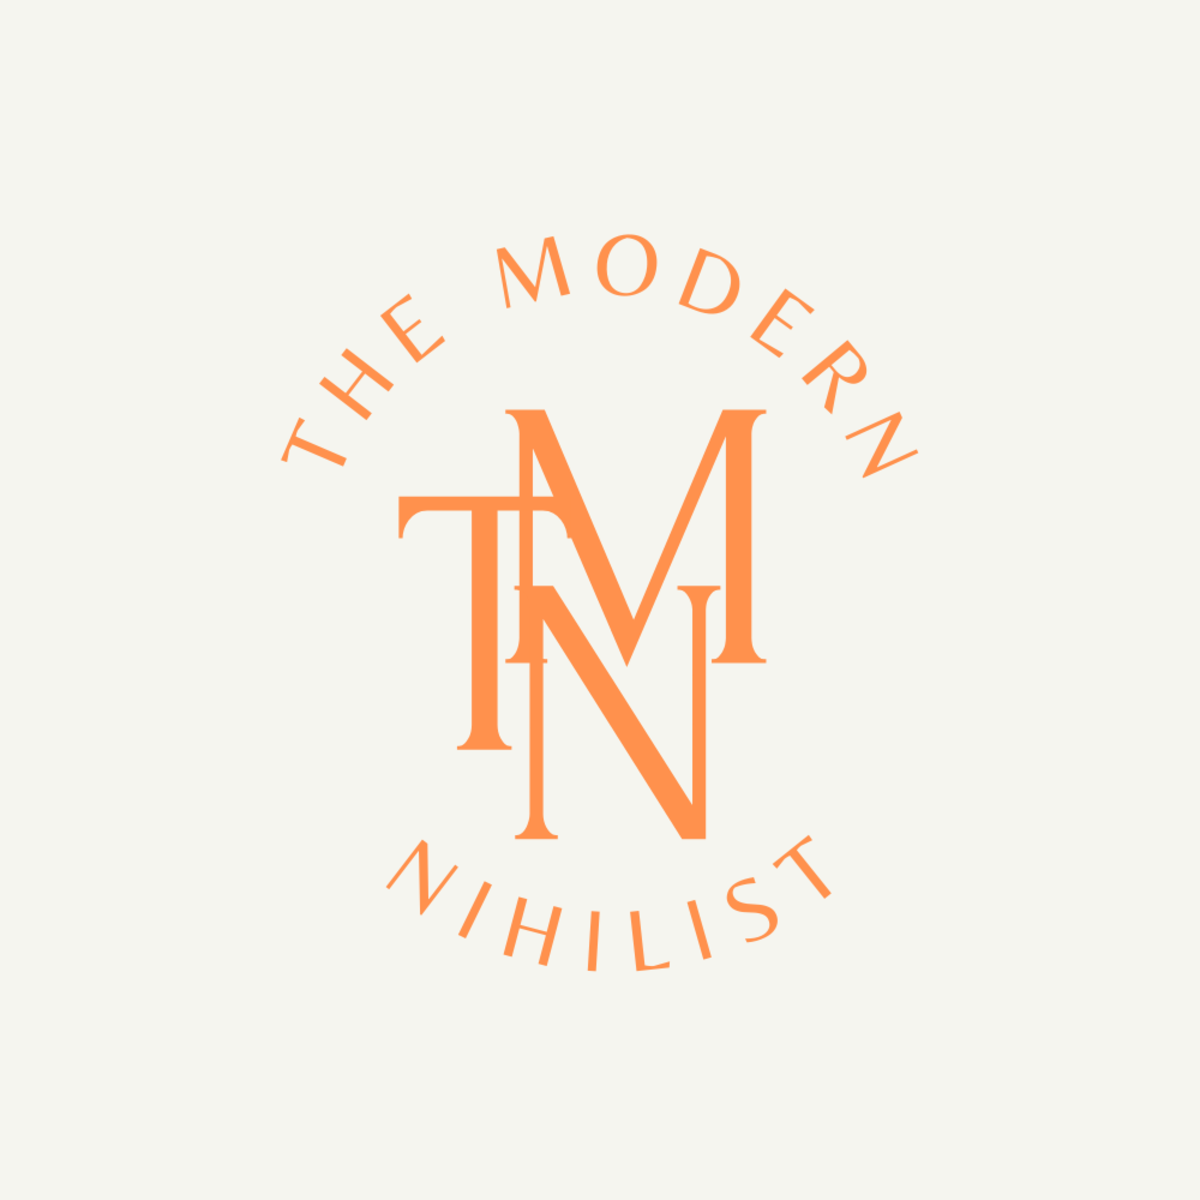 #001 Introduction to Modern Nihilism